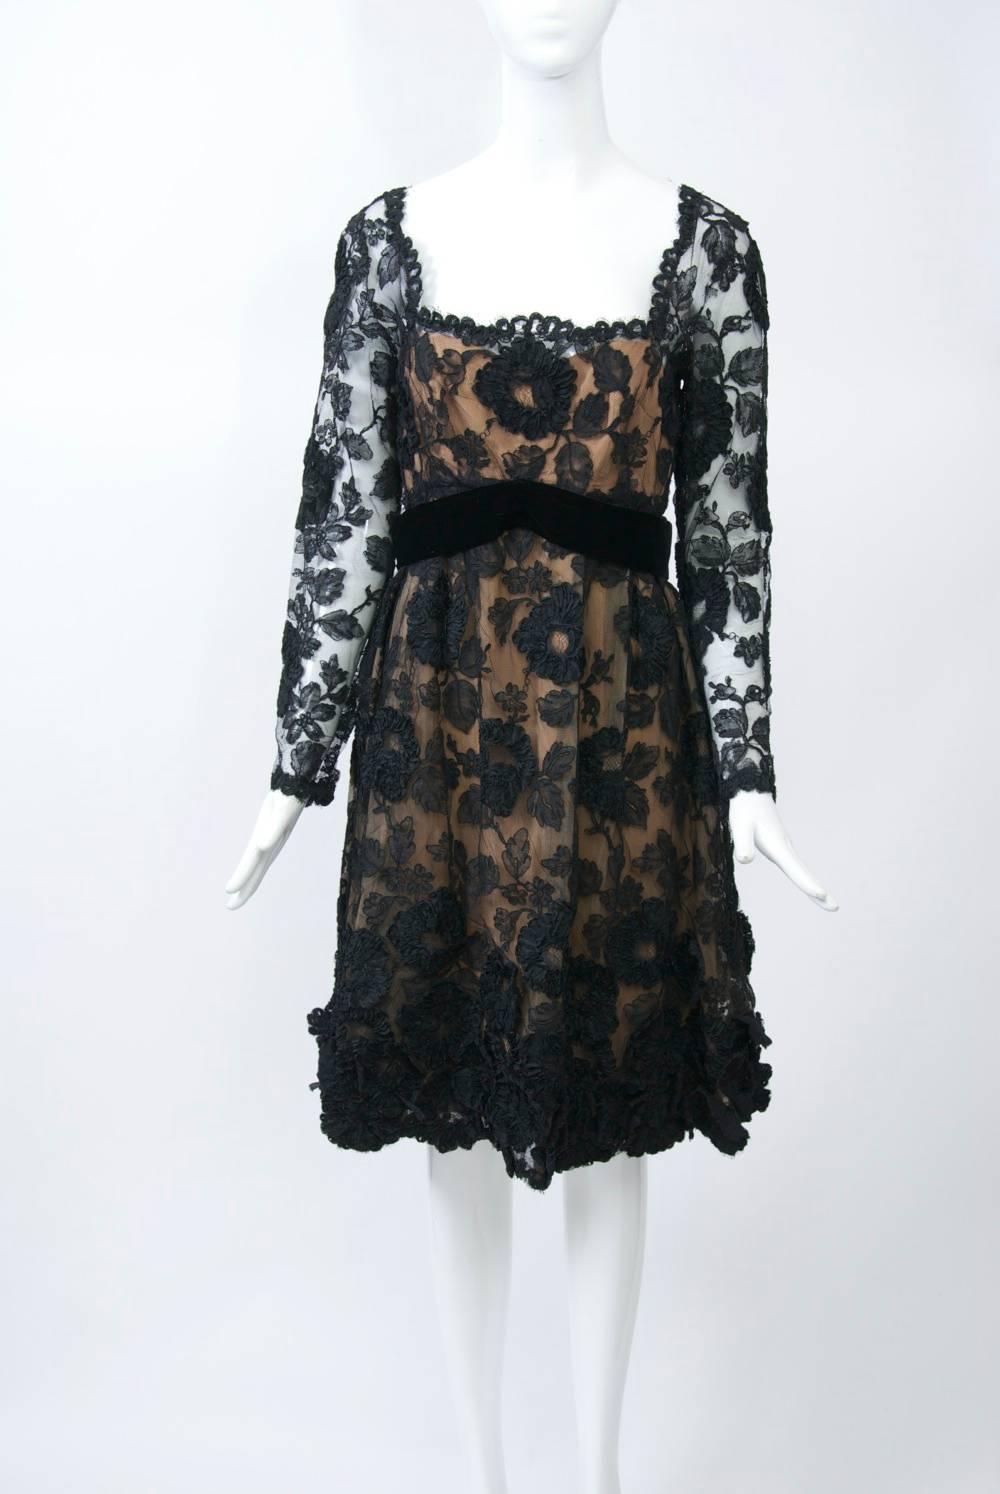 Vintage cocktail dress of black lace featuring a wide, square neckline, empire waist, and long sleeves.  Accents of black ribbon flower appliqués adorn the skirt, which has a scalloped hemline as does the neck and shoulders; a black velvet sash with